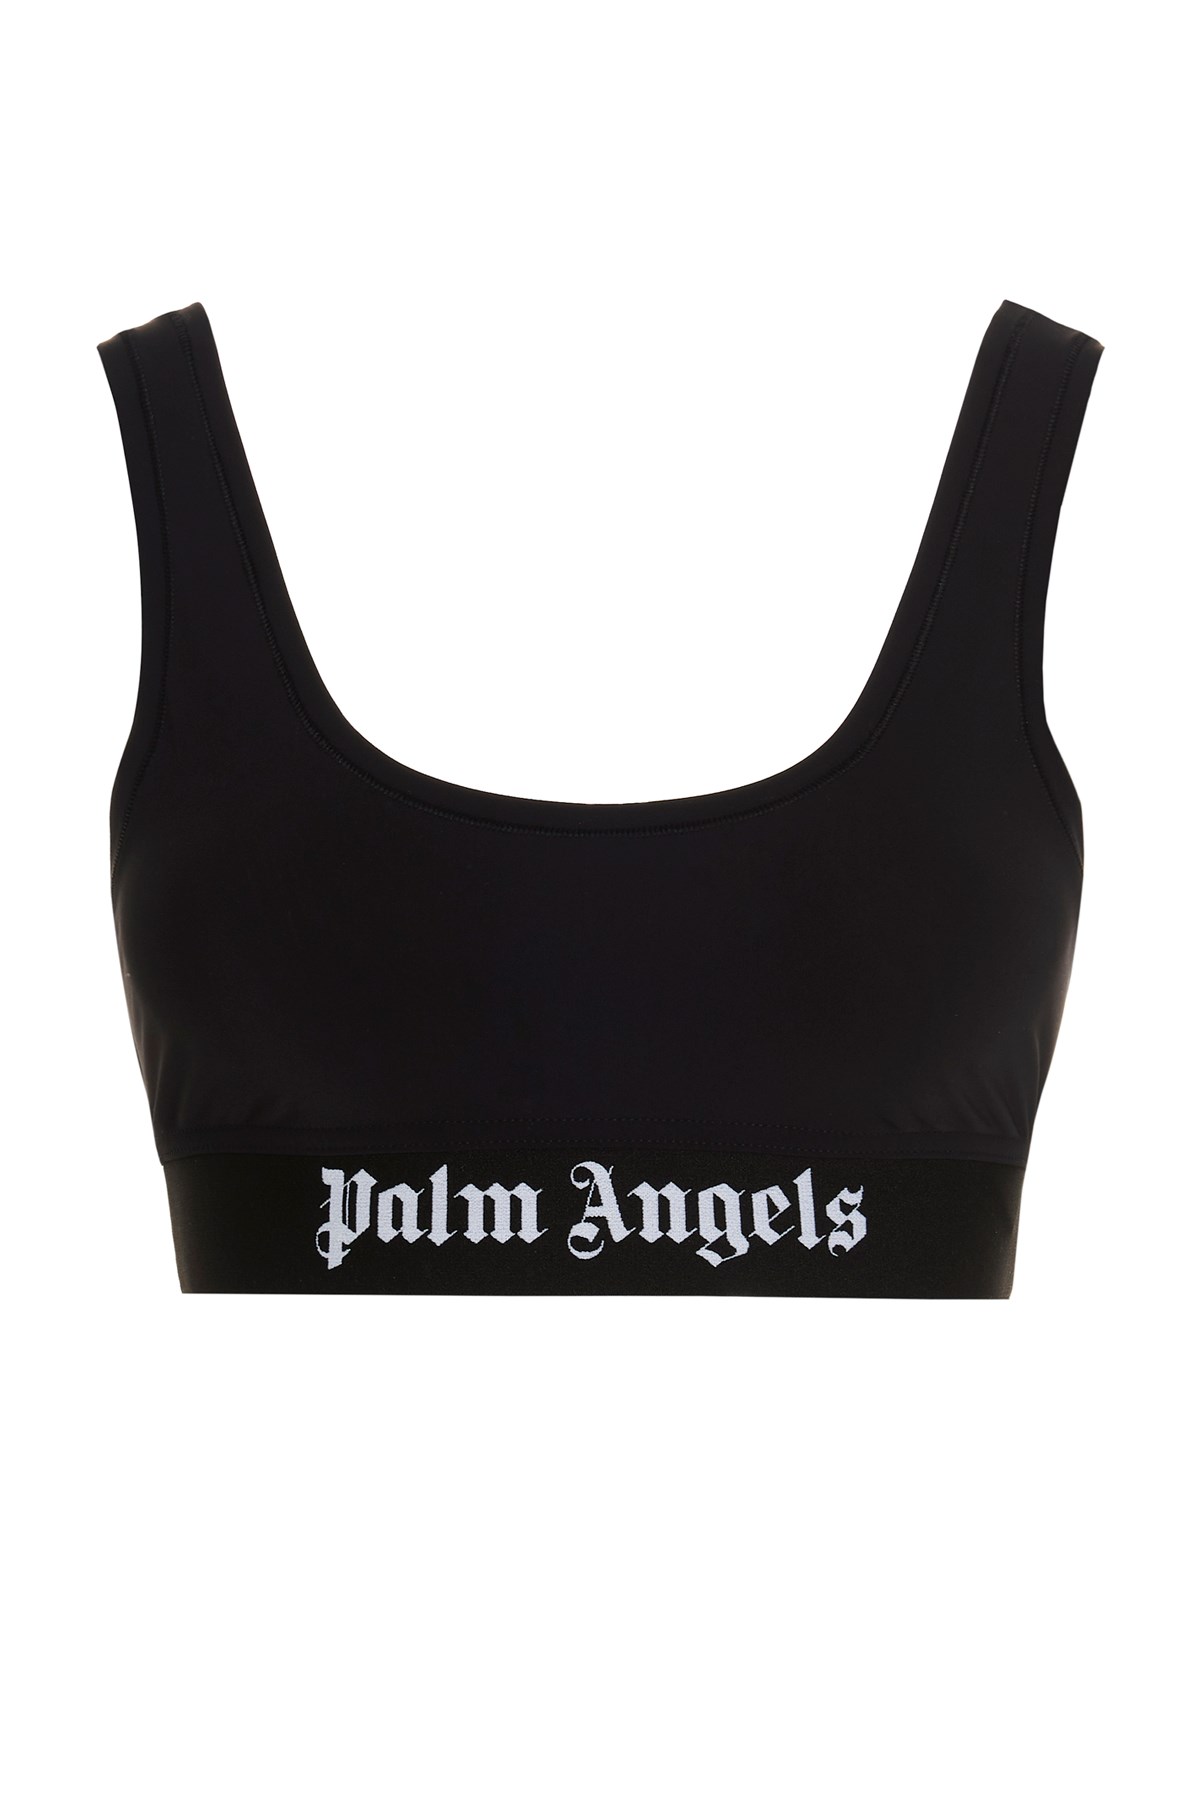 PALM ANGELS 'Classic Logo’ Sporty Top'